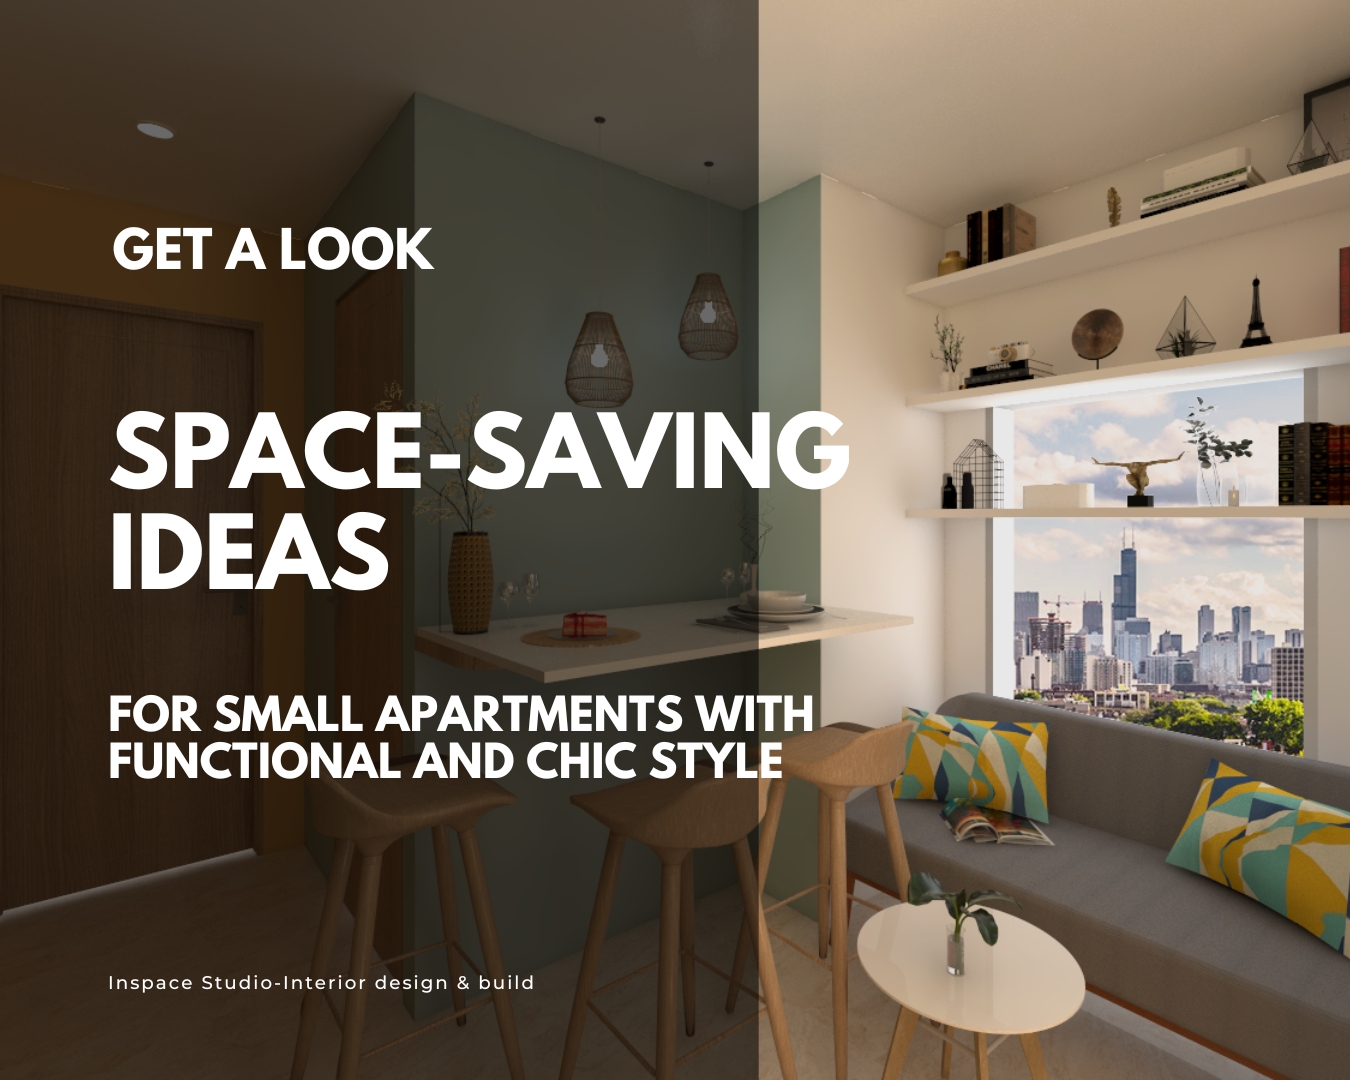 Space-saving ideas for small apartments with functional and chic style